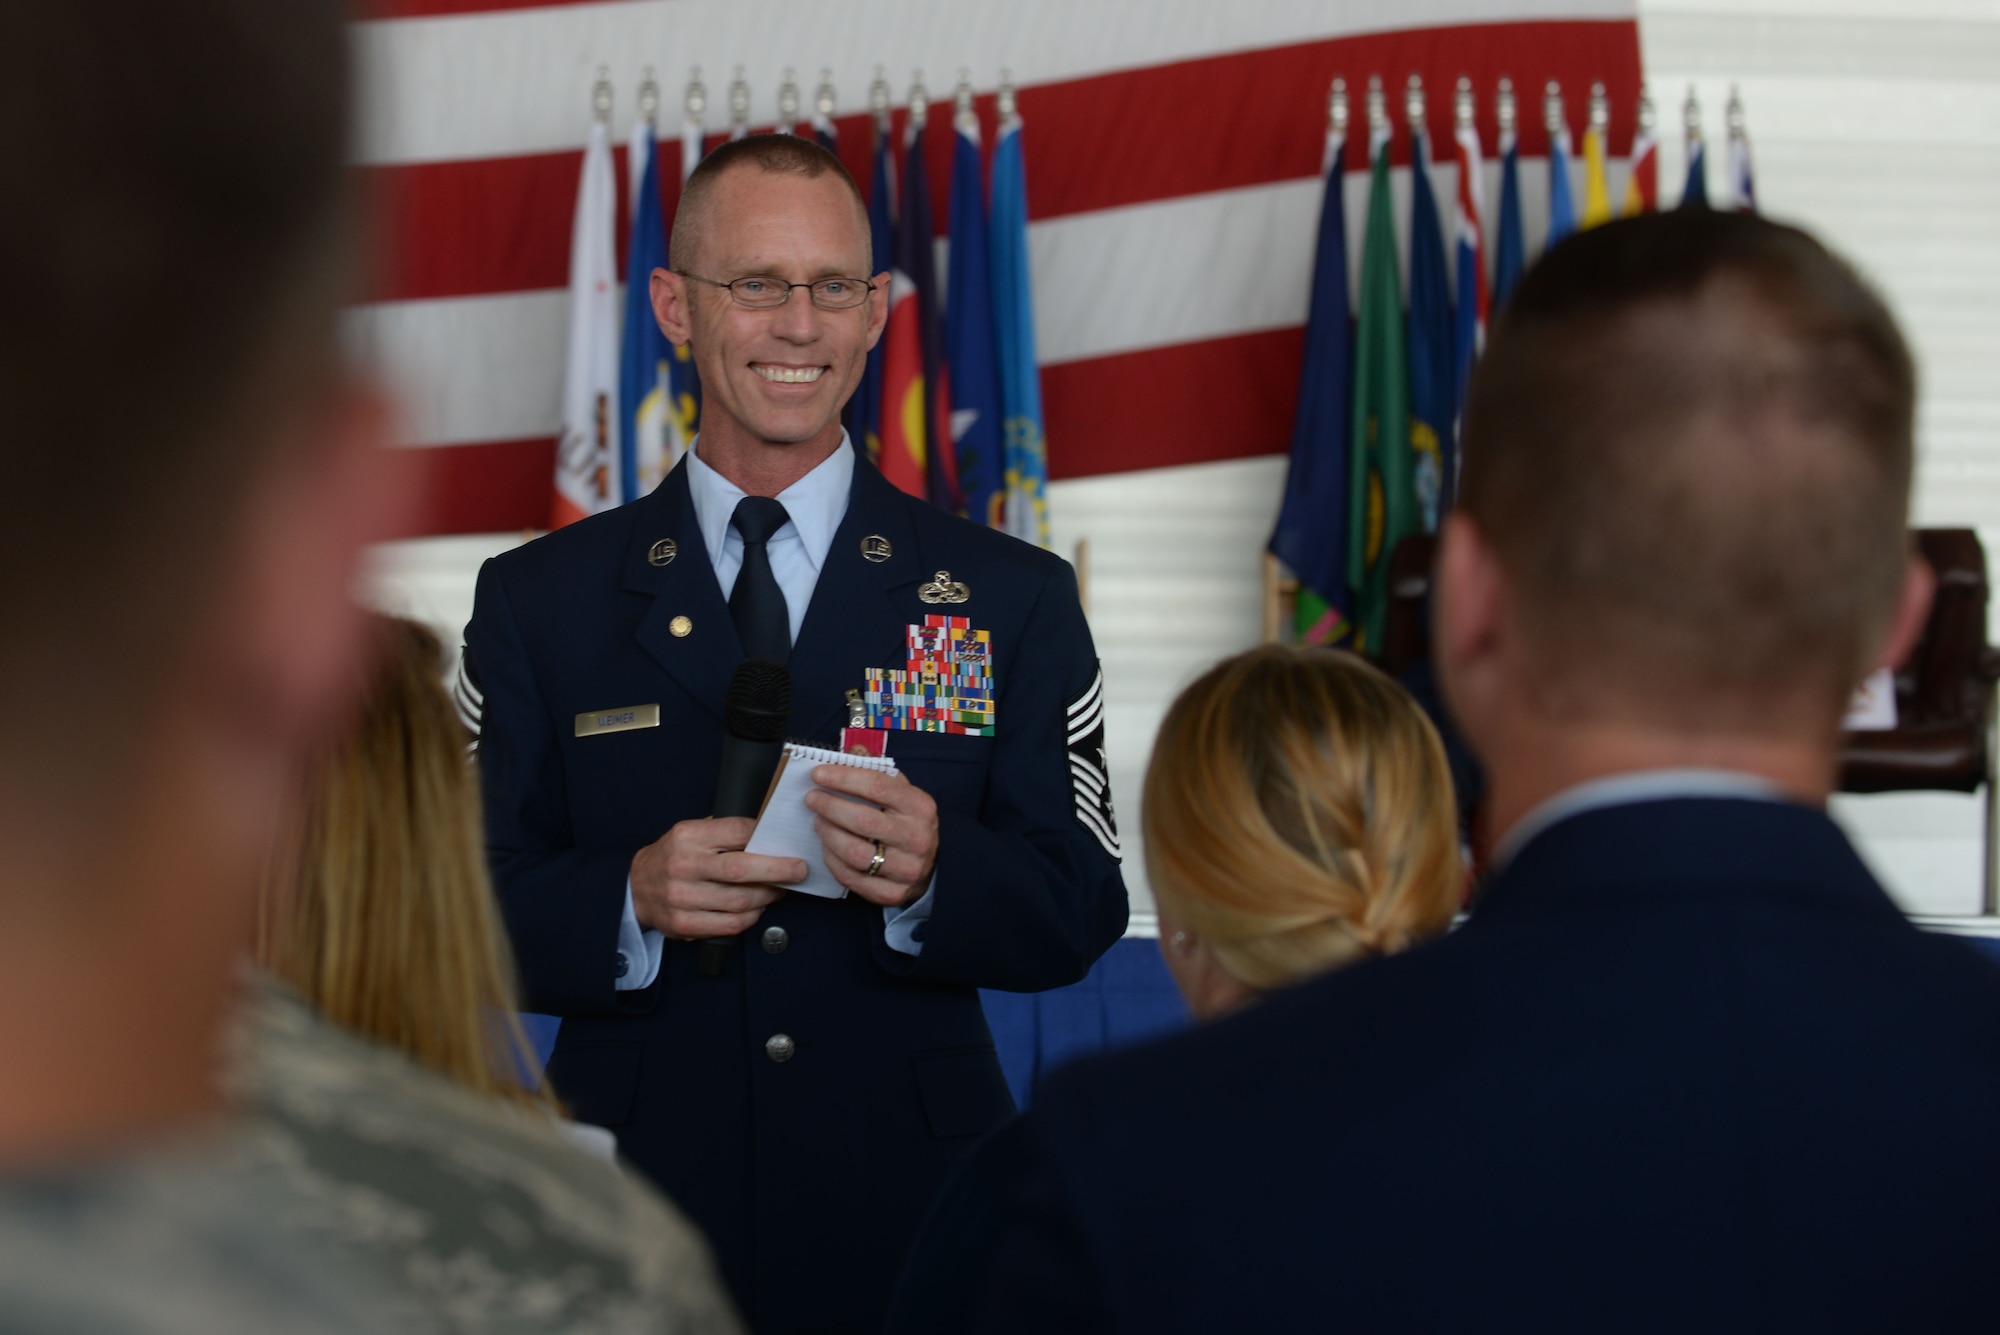 Chief Master Sgt. Geoff Weimer thanks his family for their support at his retirement ceremony at Minot Air Force Base, N.D., June 24, 2016. Weimer served as the command chief of the 5th Bomb Wing for the last two years. (U.S. Air Force photo/Airman 1st Class Jessica Weissman)